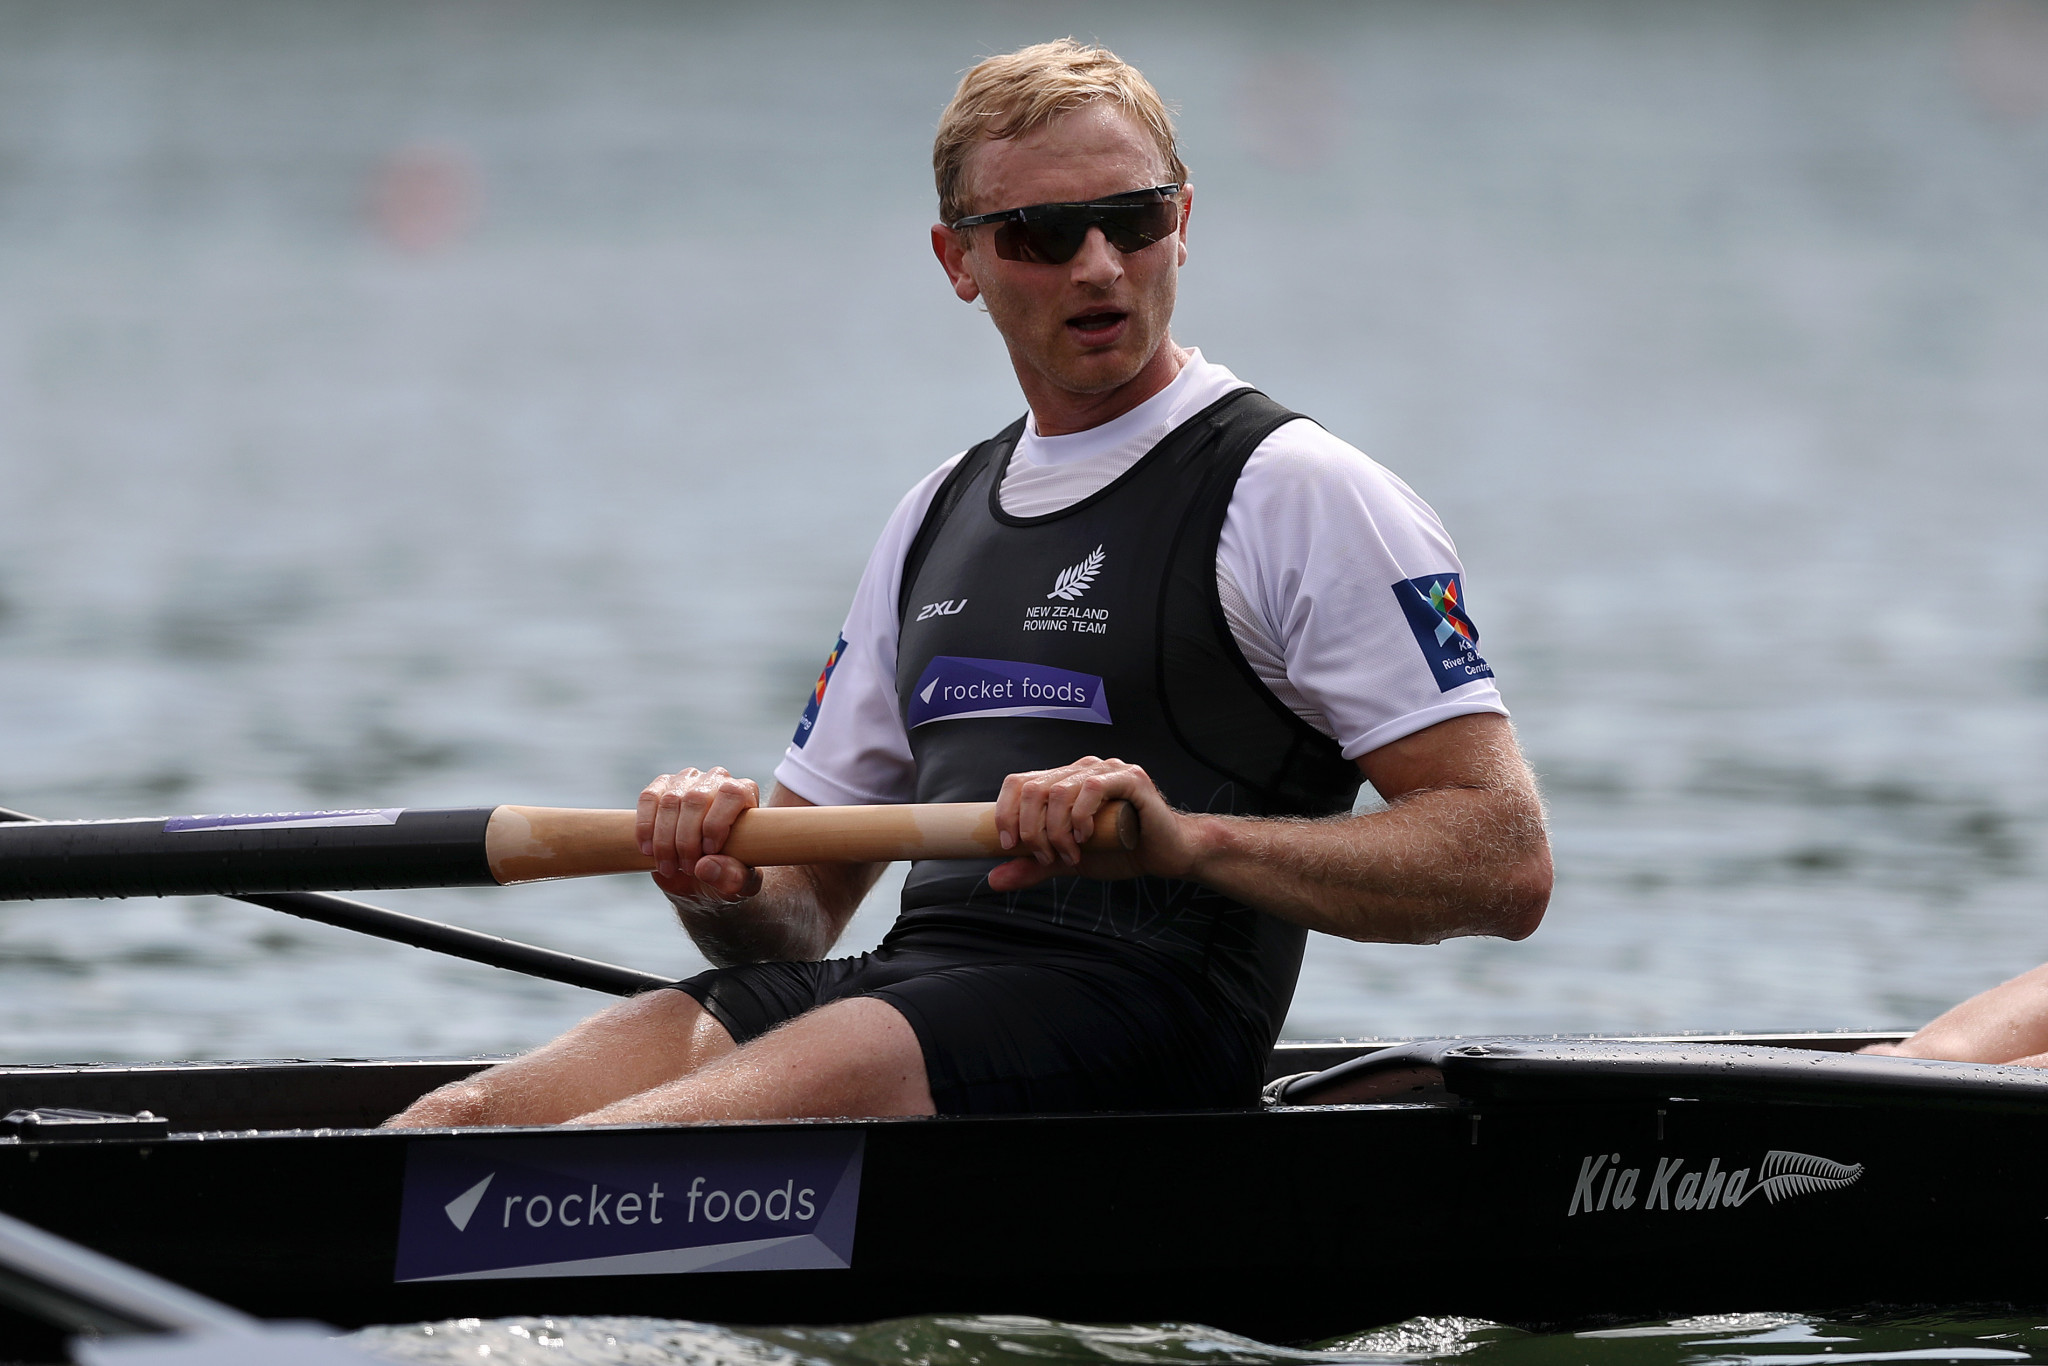 New Zealand's Hamish Bond made the switch from rowing to cycling ©Getty Images